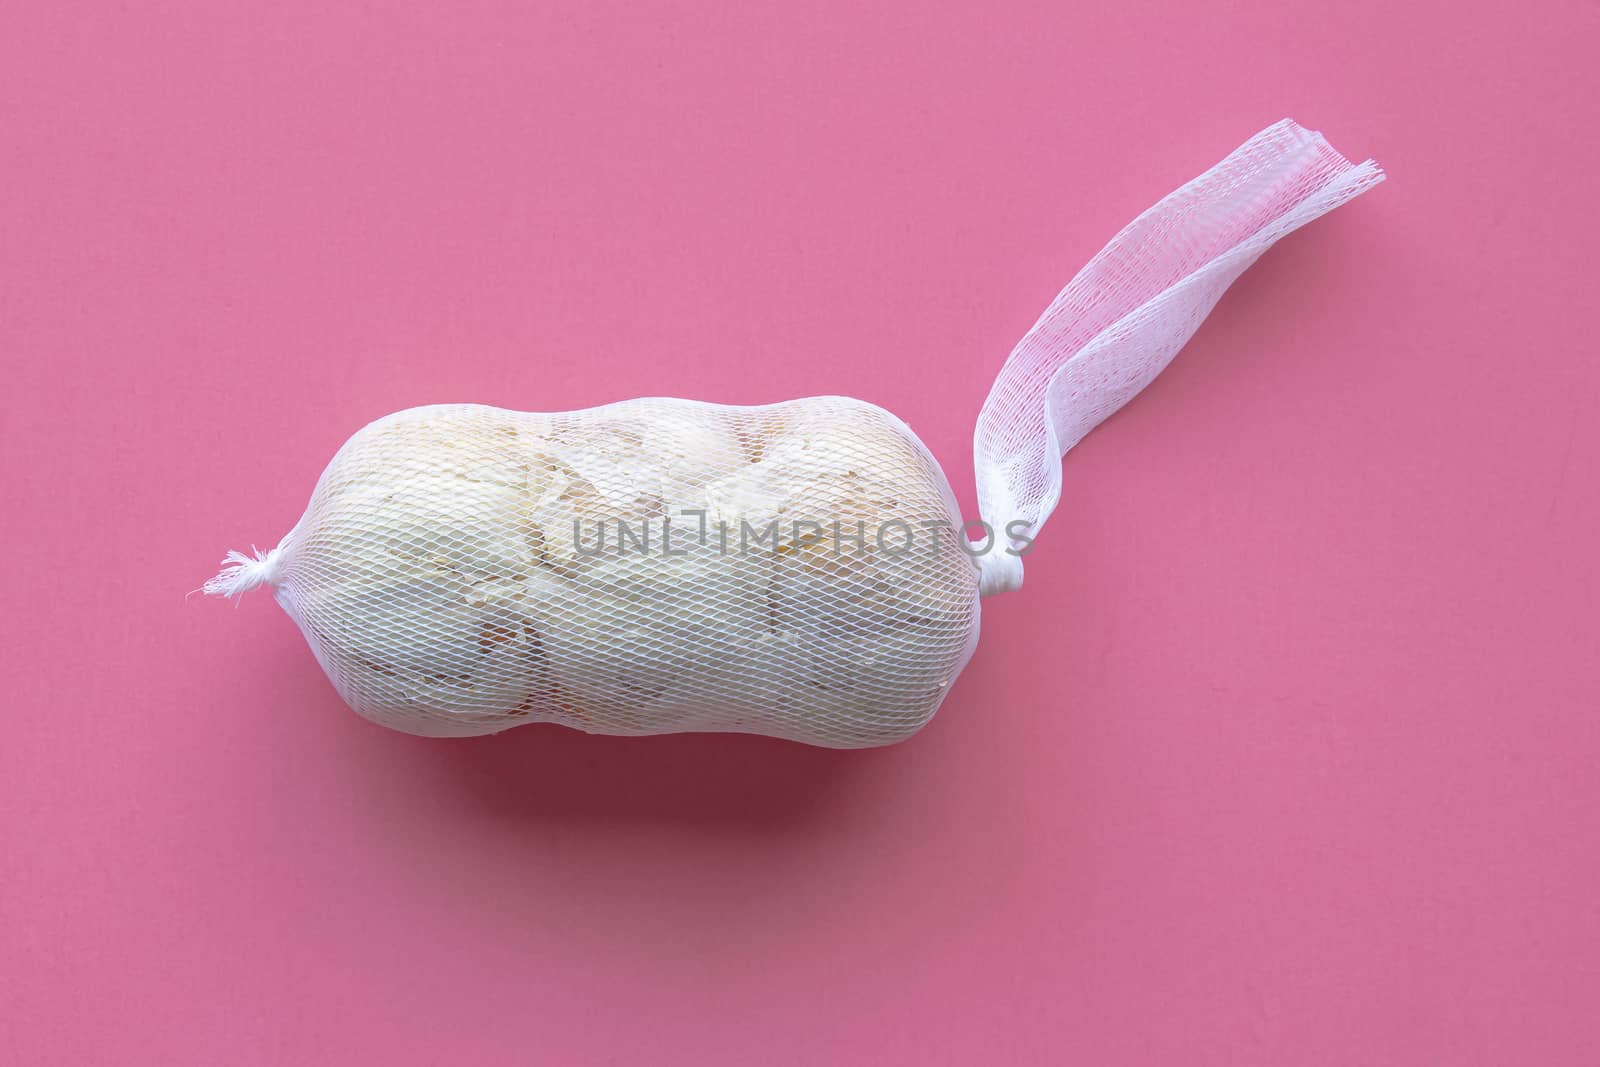 A bag of white heads of garlic on a pink background by oasisamuel